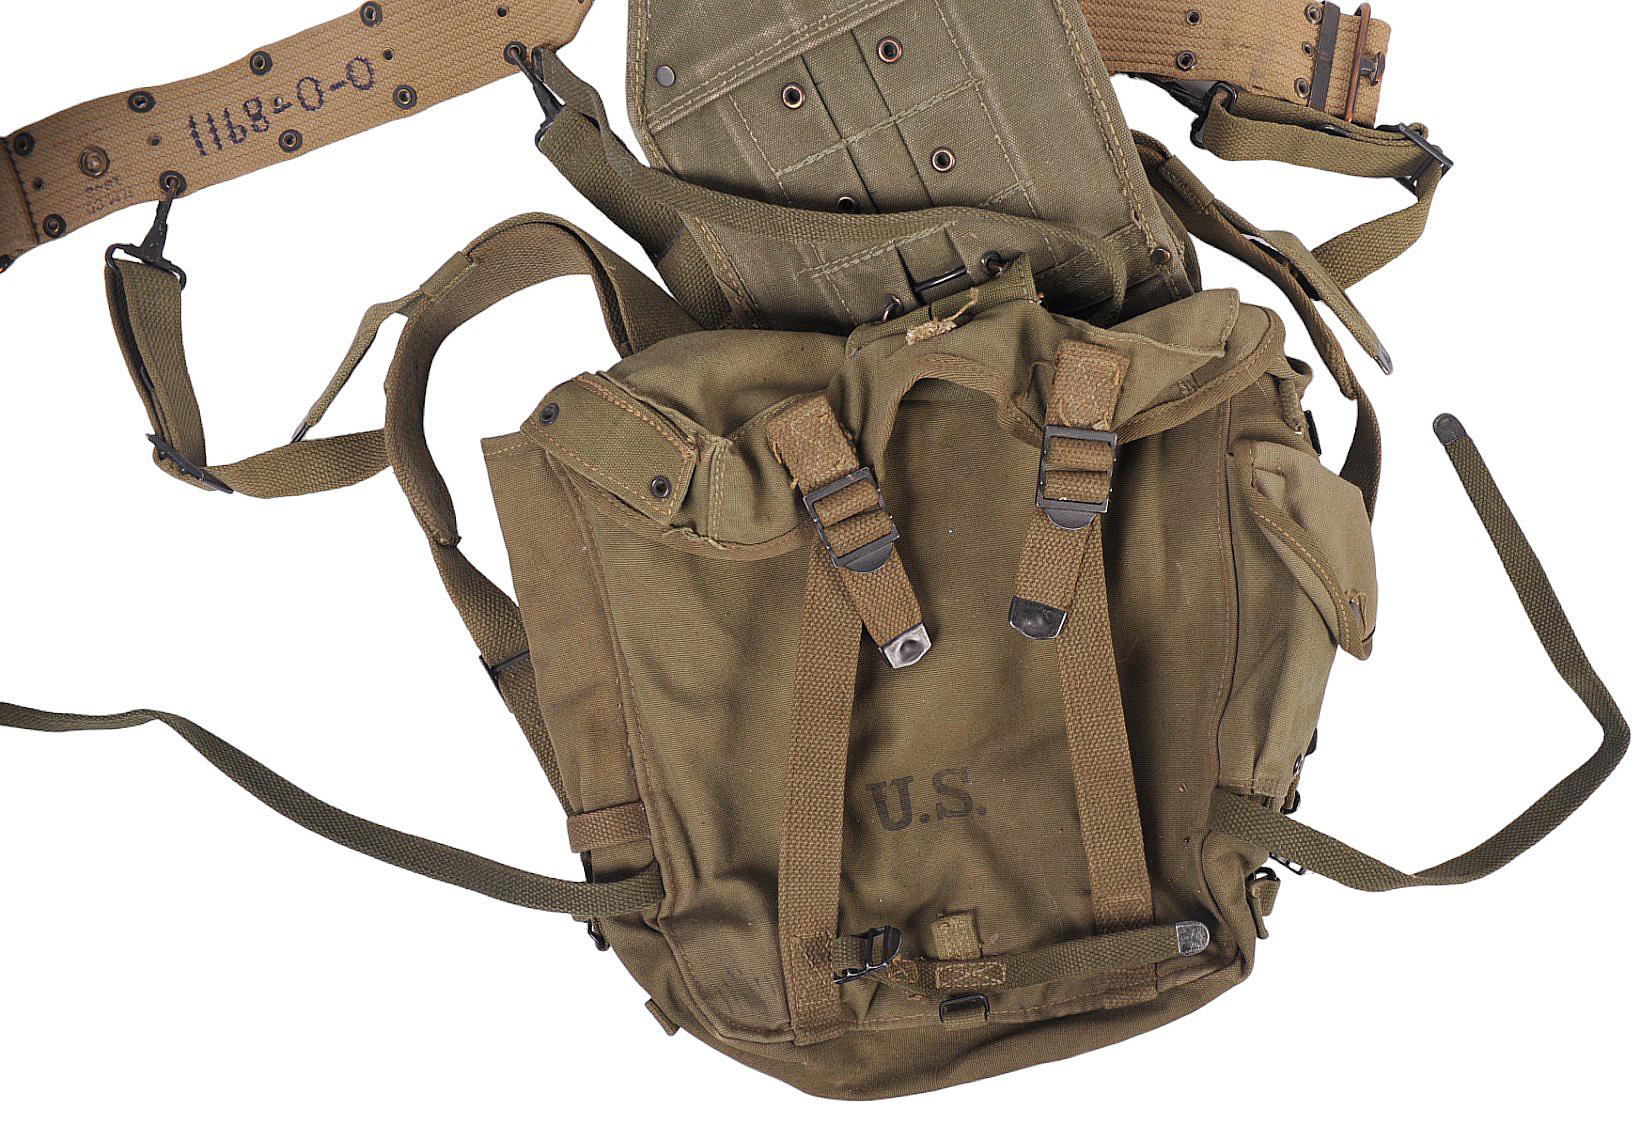 US Military WWII issue Field Pack, Suspenders, Web Belt and Entrenching Tool (A)